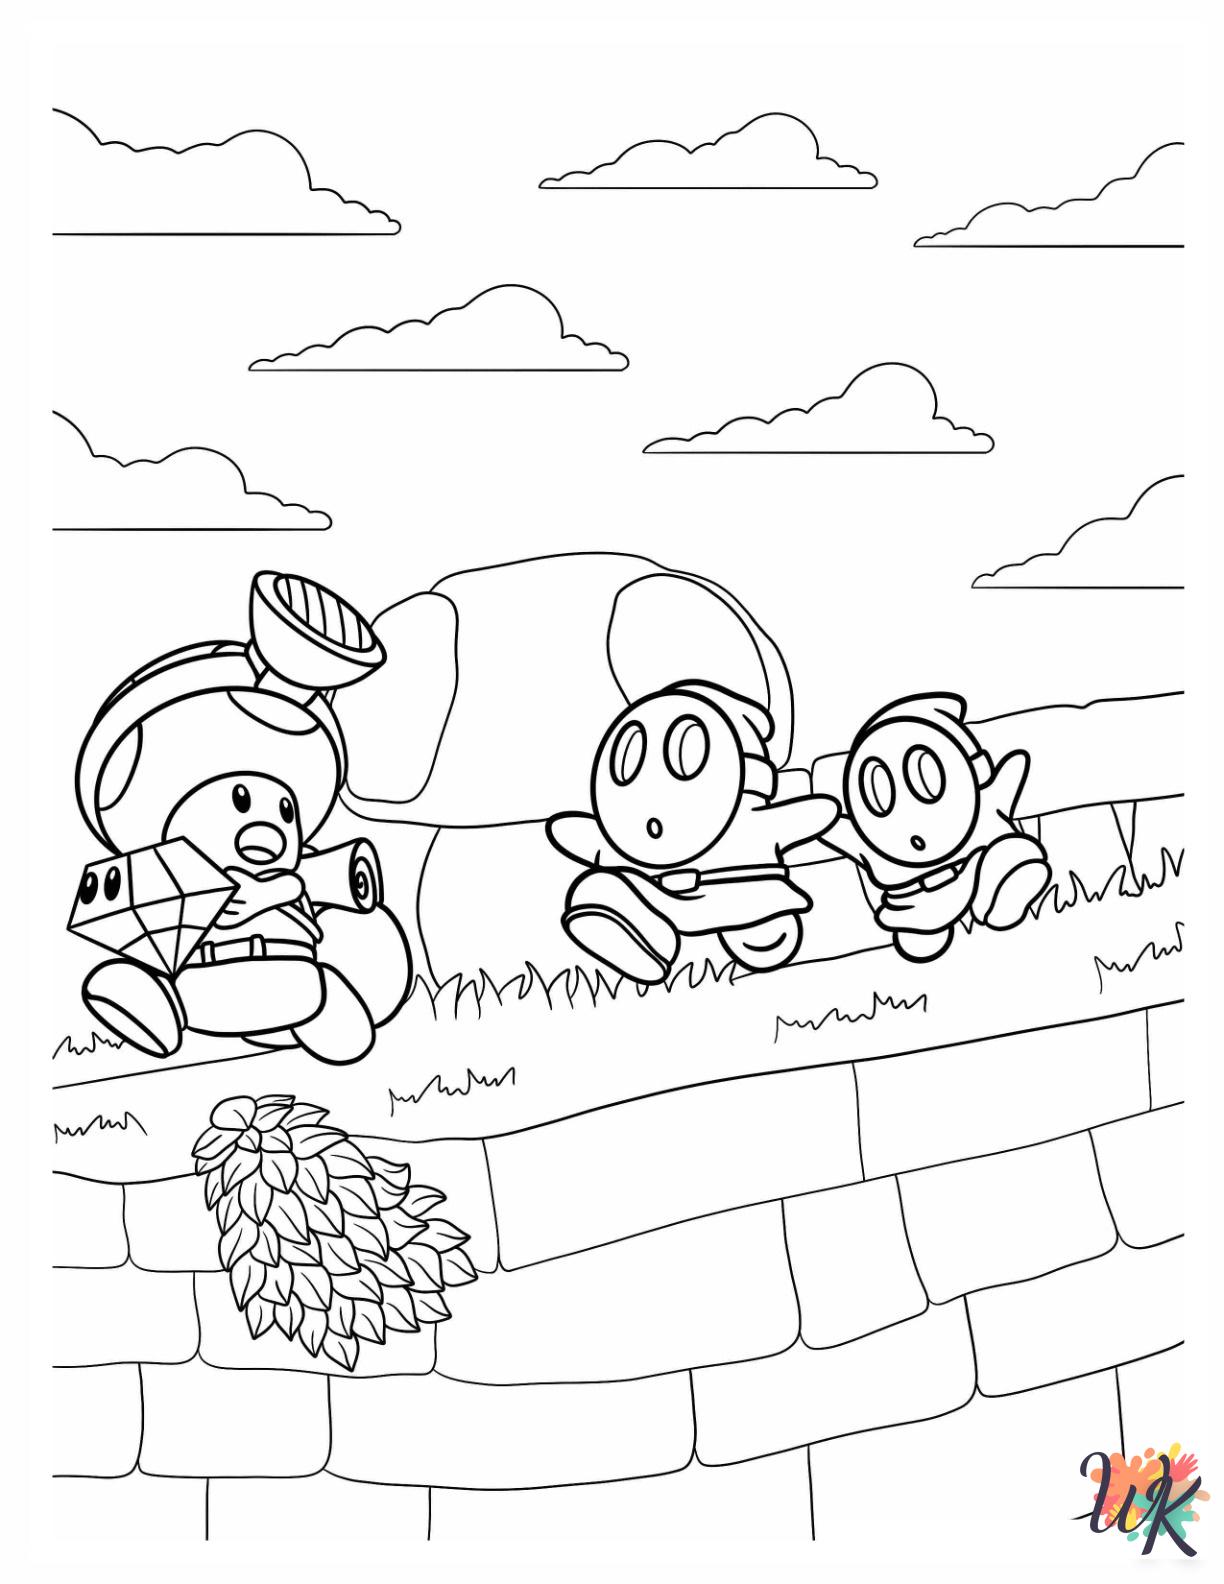 Shy Guy coloring pages easy